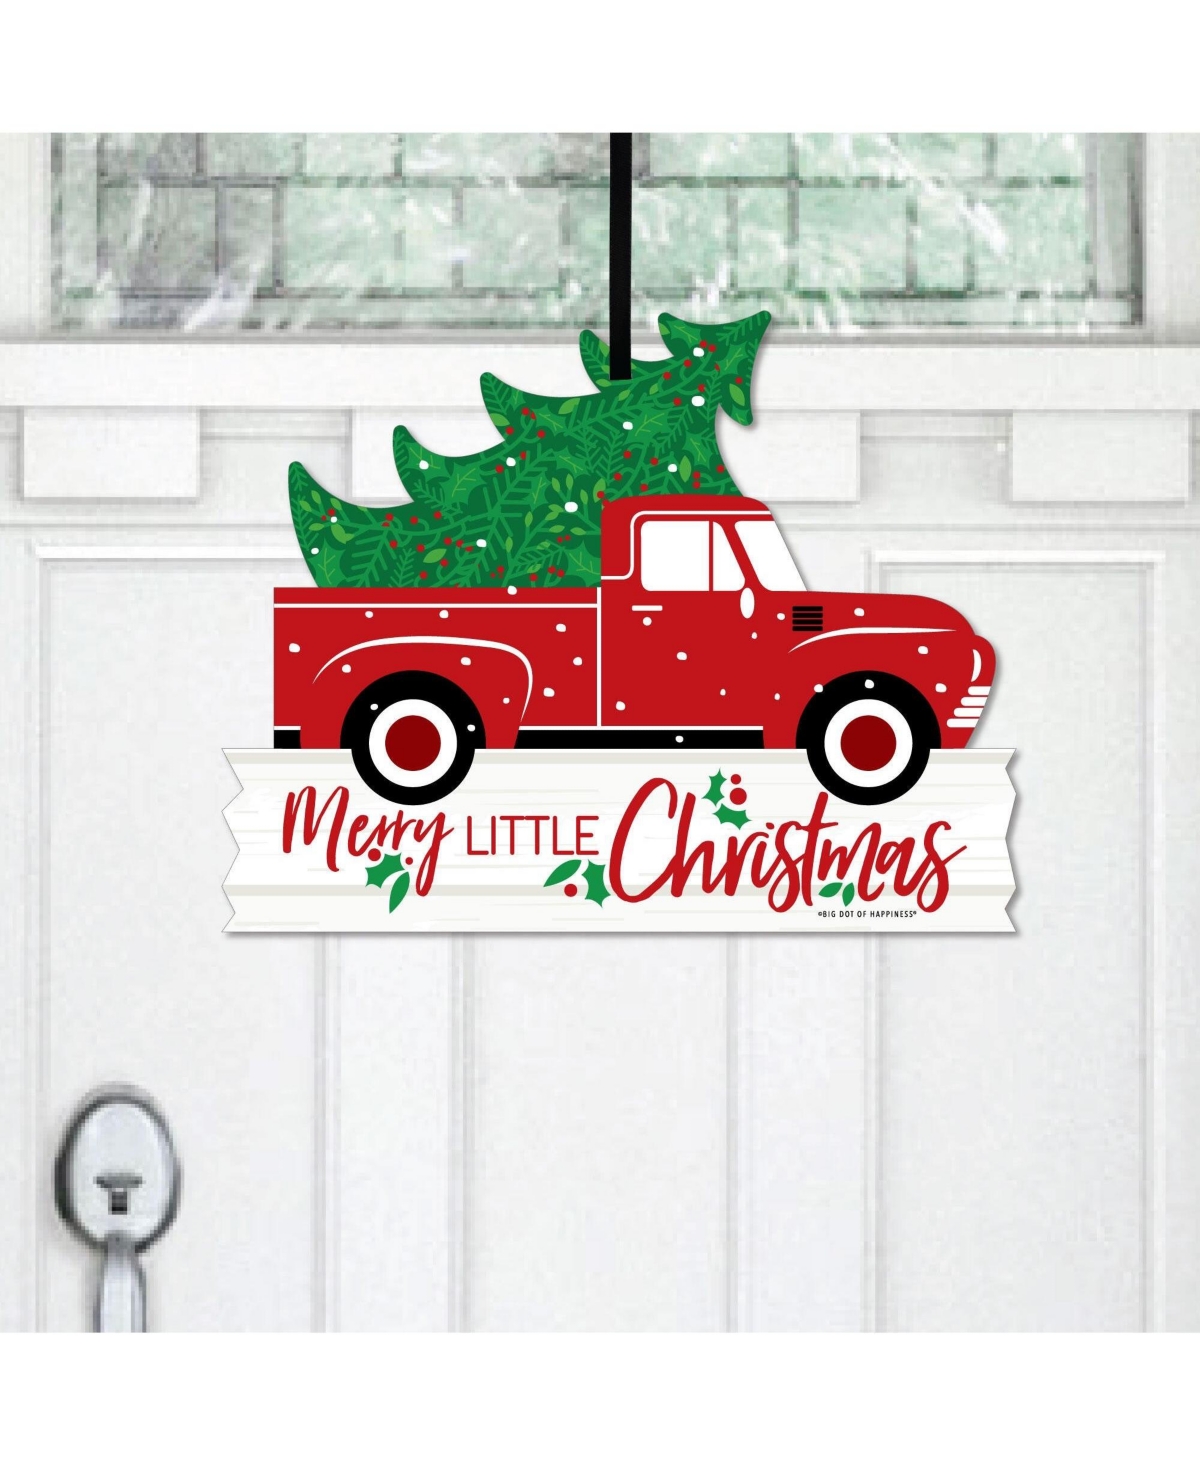 Merry Little Christmas Tree - Hanging Porch Outdoor Front Door Decor - 1 Pc Sign